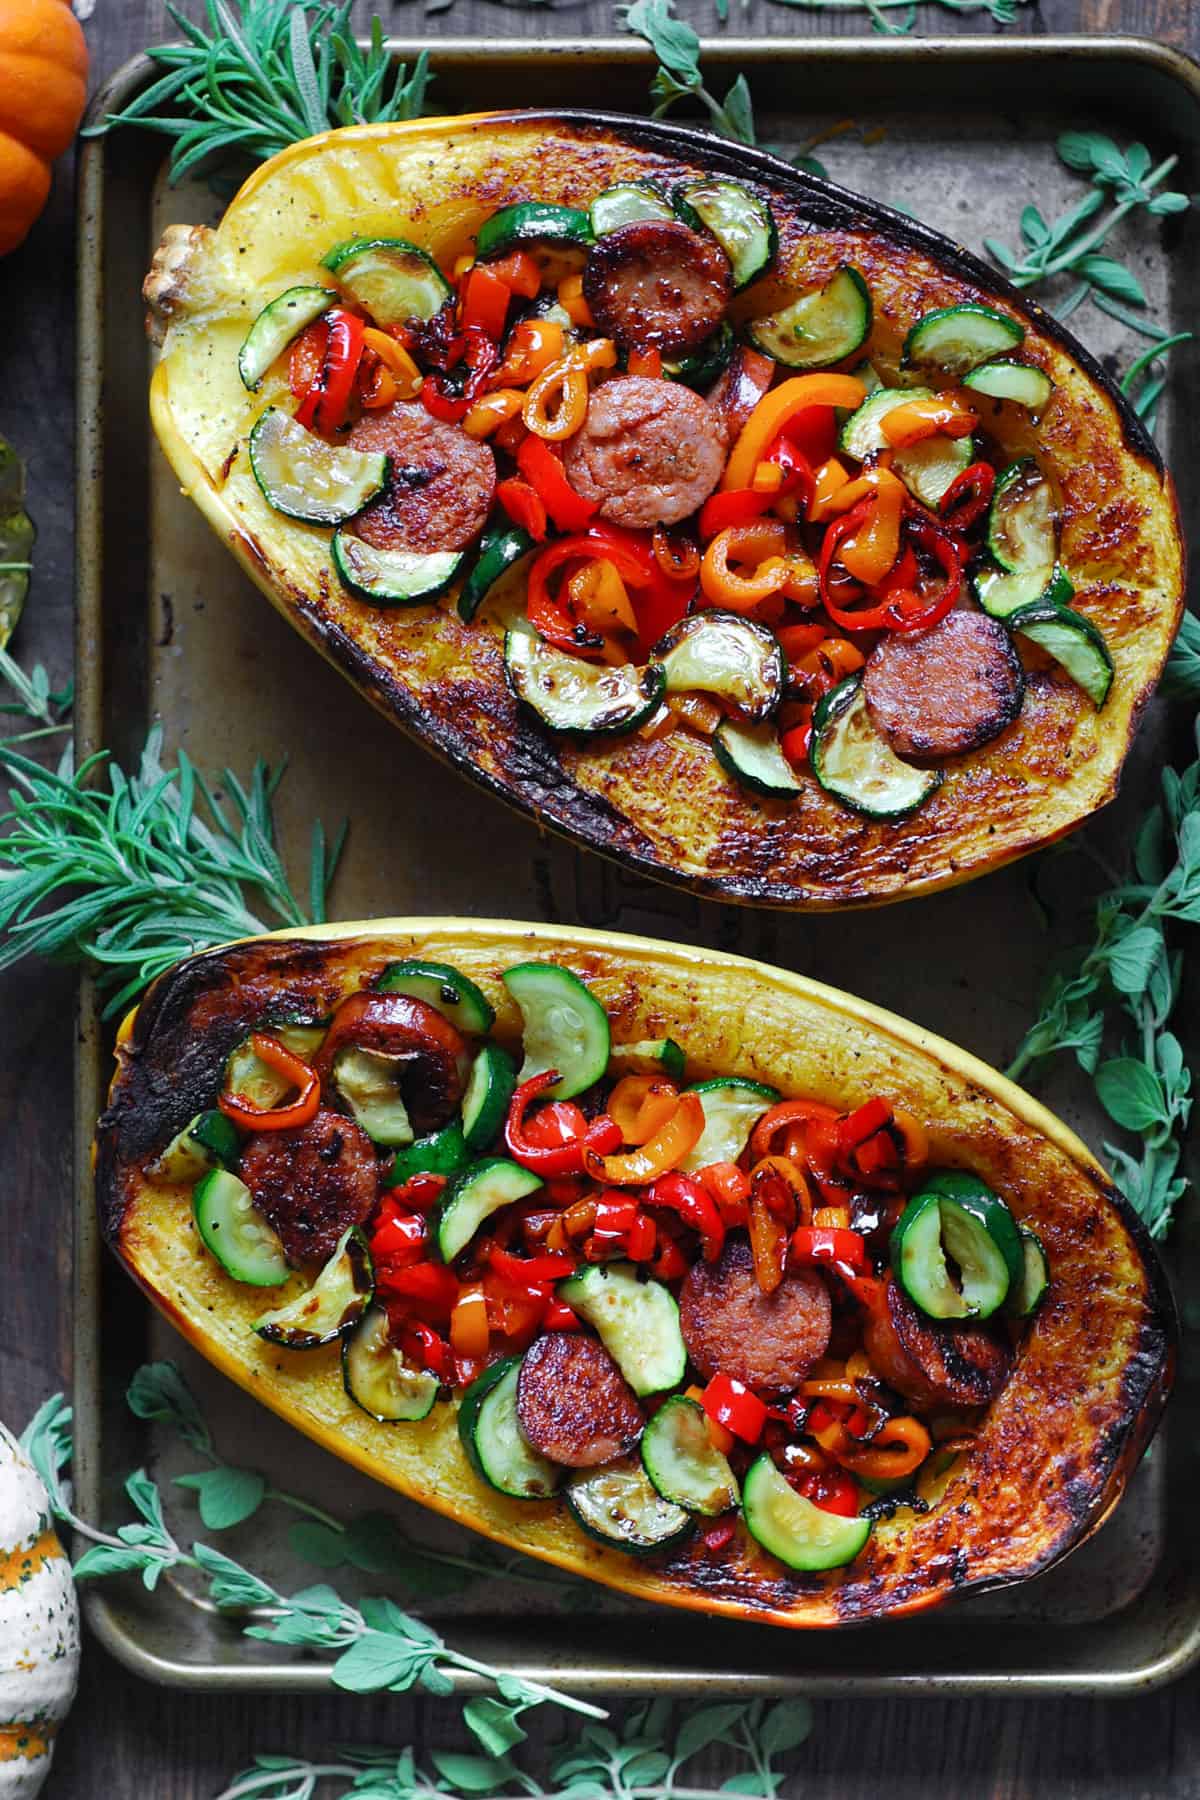 Stuffed Roasted Spaghetti Squash (2 halves) with Smoked Sausage, Roasted Bell Peppers, and Zucchini - on a baking sheet.